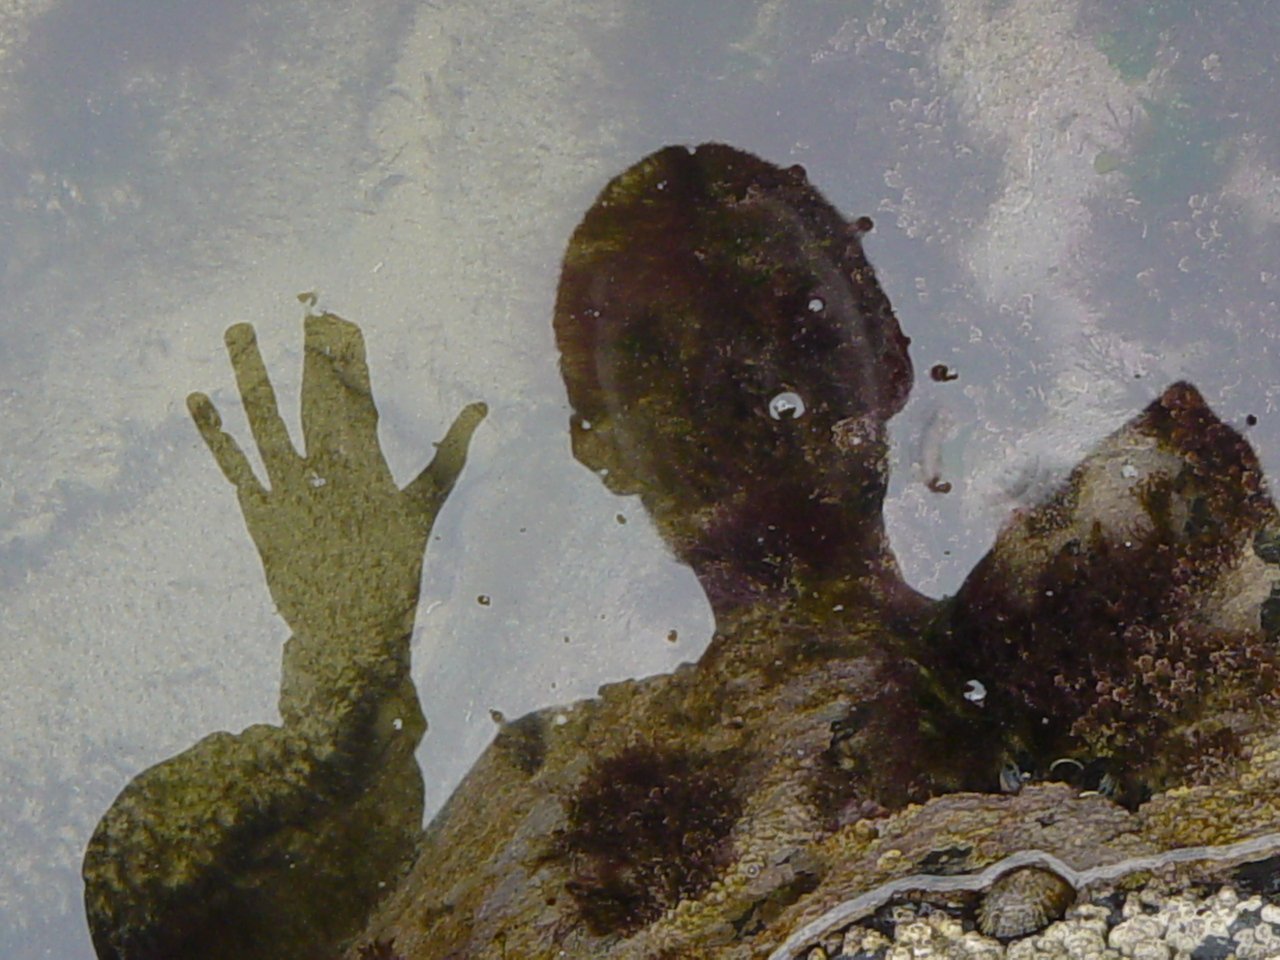 a person's shadow in water with a person's hand in the background